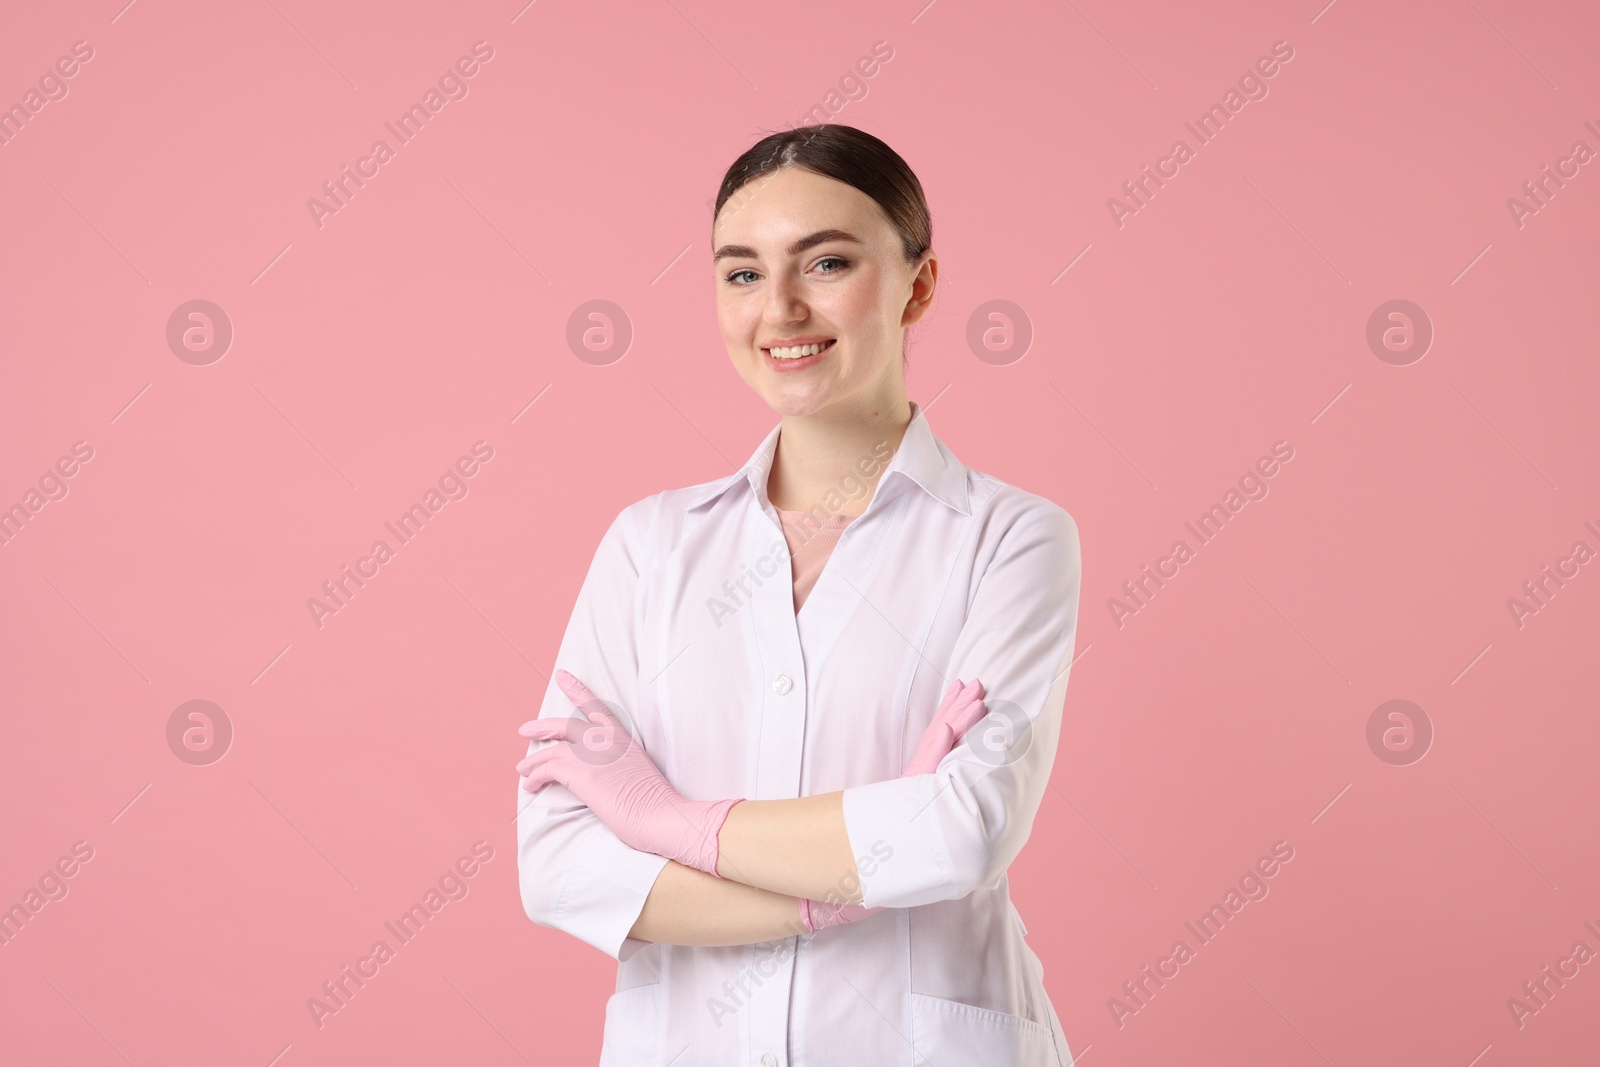 Photo of Cosmetologist in medical uniform on pink background